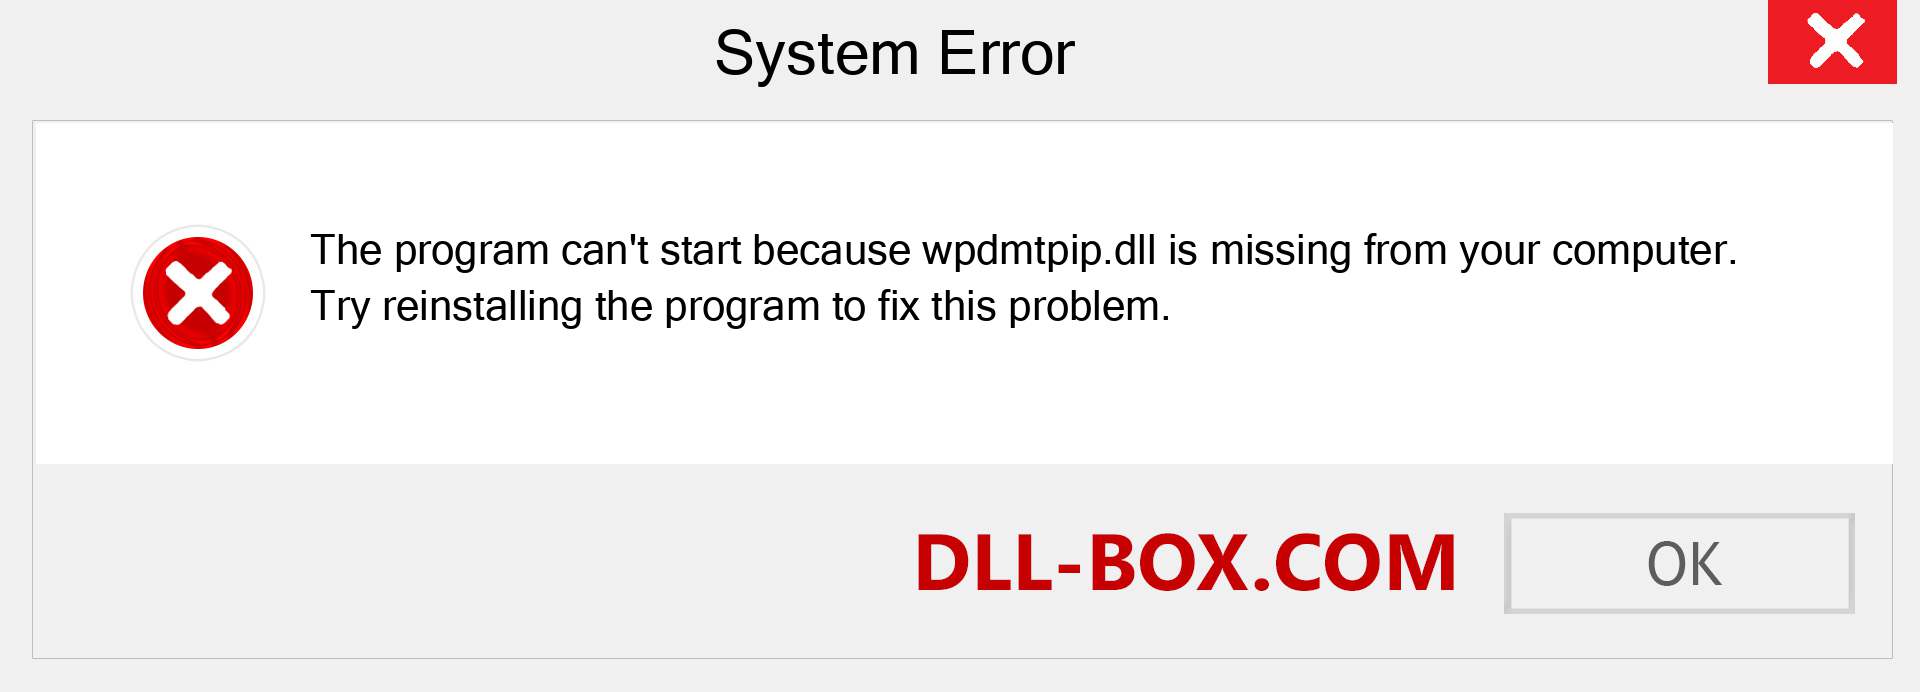  wpdmtpip.dll file is missing?. Download for Windows 7, 8, 10 - Fix  wpdmtpip dll Missing Error on Windows, photos, images